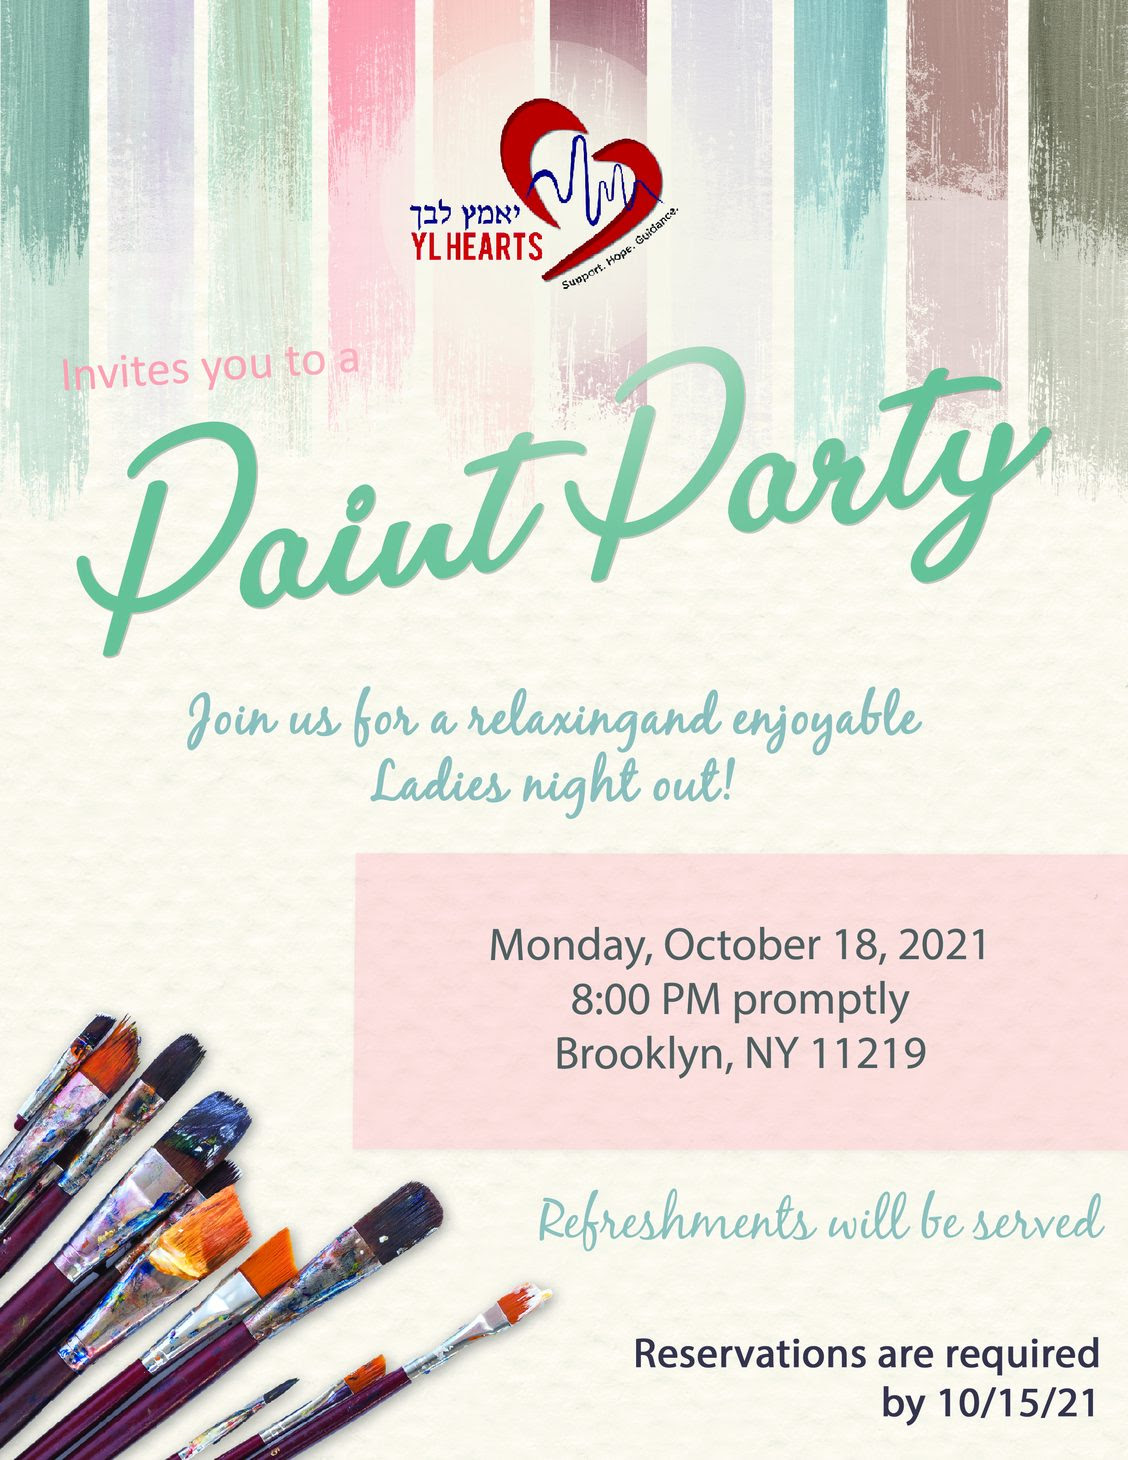 Ladies Night Out – Paint Party